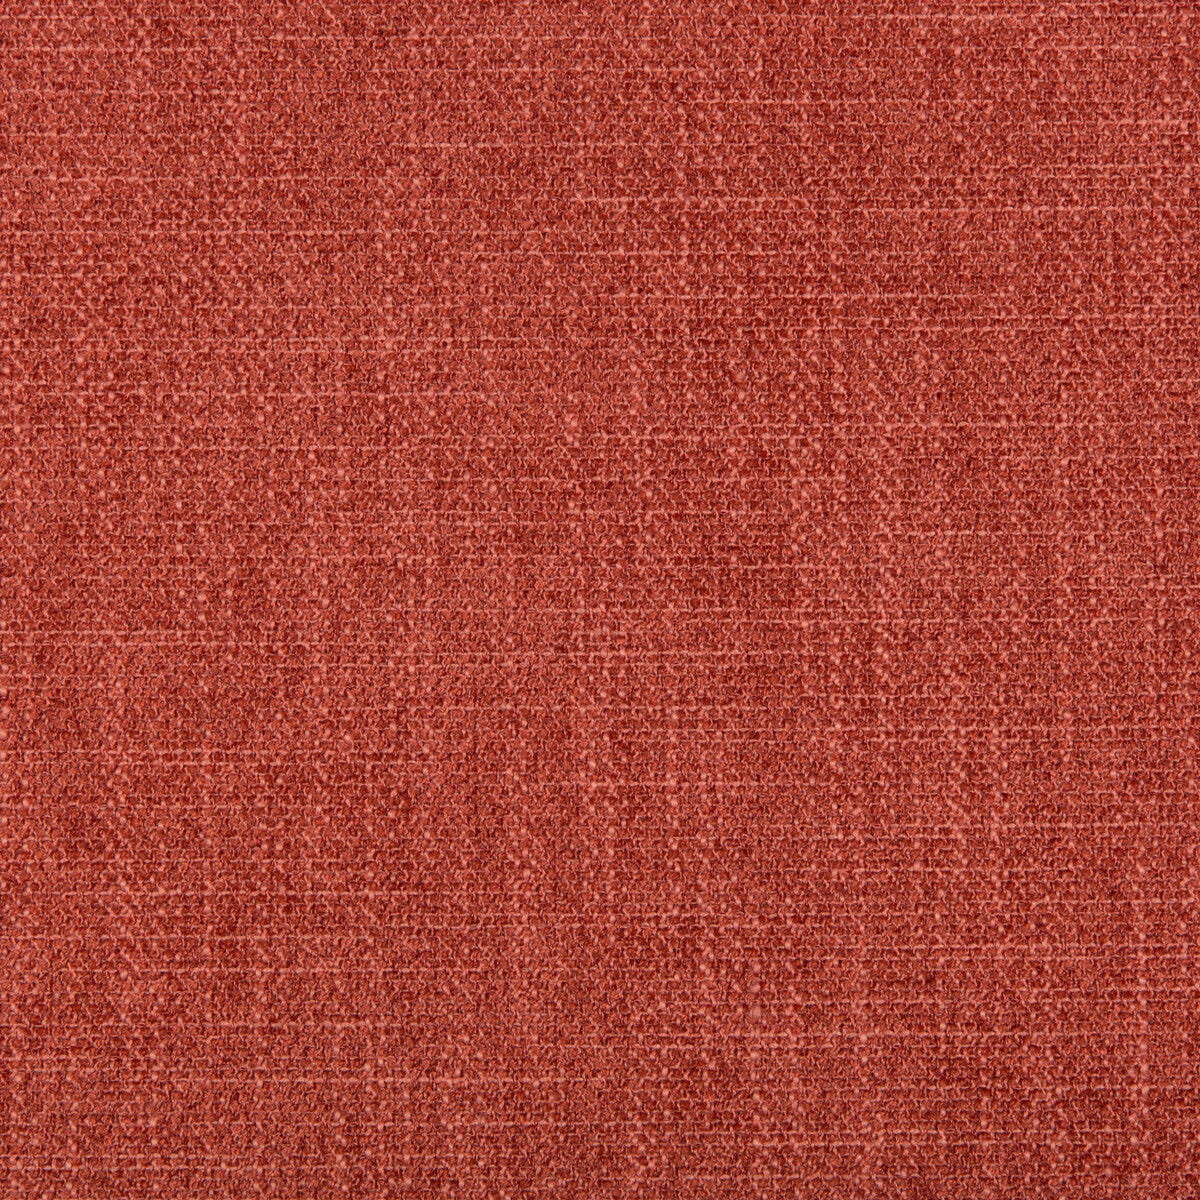 Kf Smt fabric - pattern 35390.12.0 - by Kravet Smart in the Performance Crypton Home collection